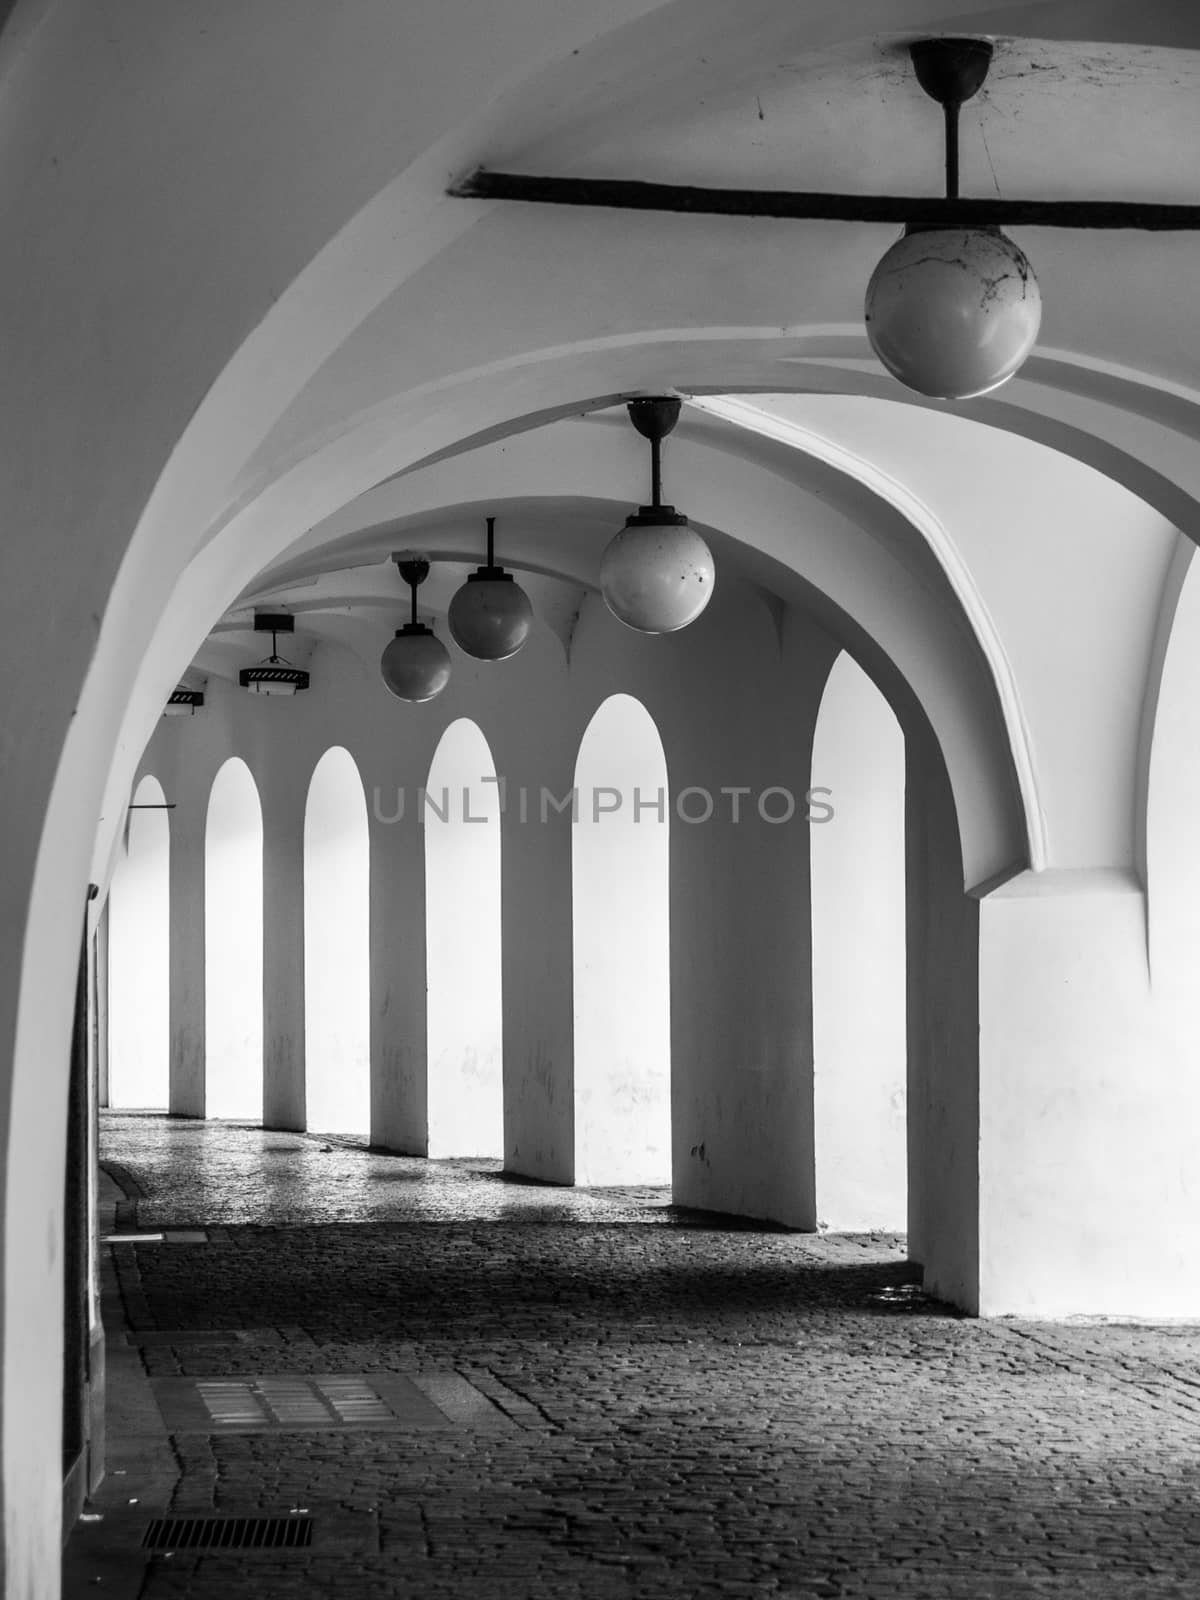 Old historical arcade at Little Square in Old Town, Prague, Czech Republic. Black and white image.